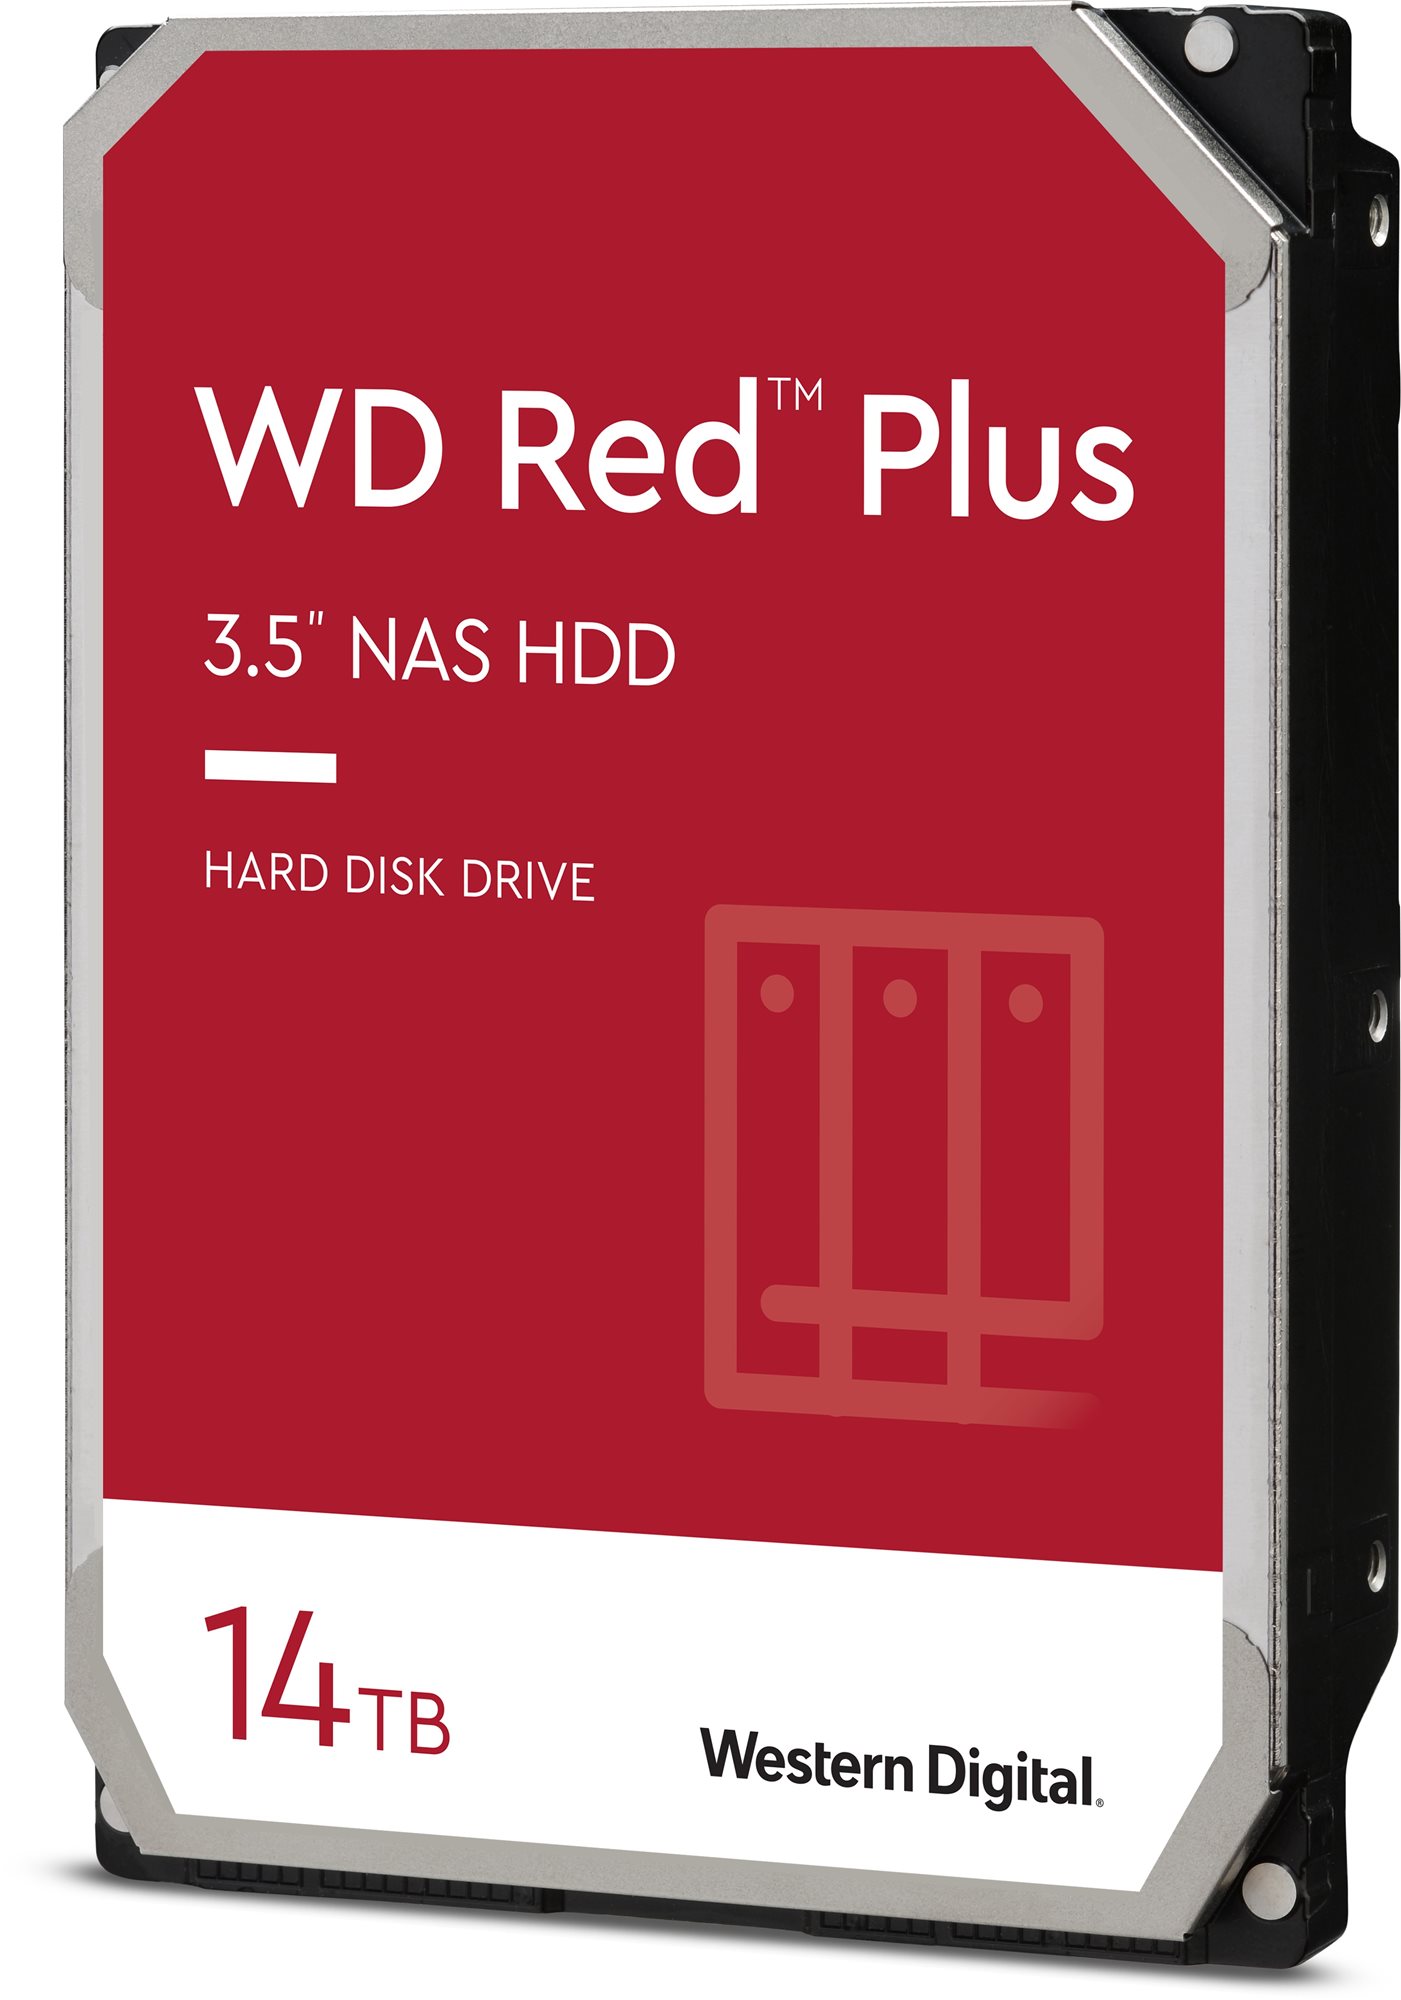 WD Red Plus 14TB